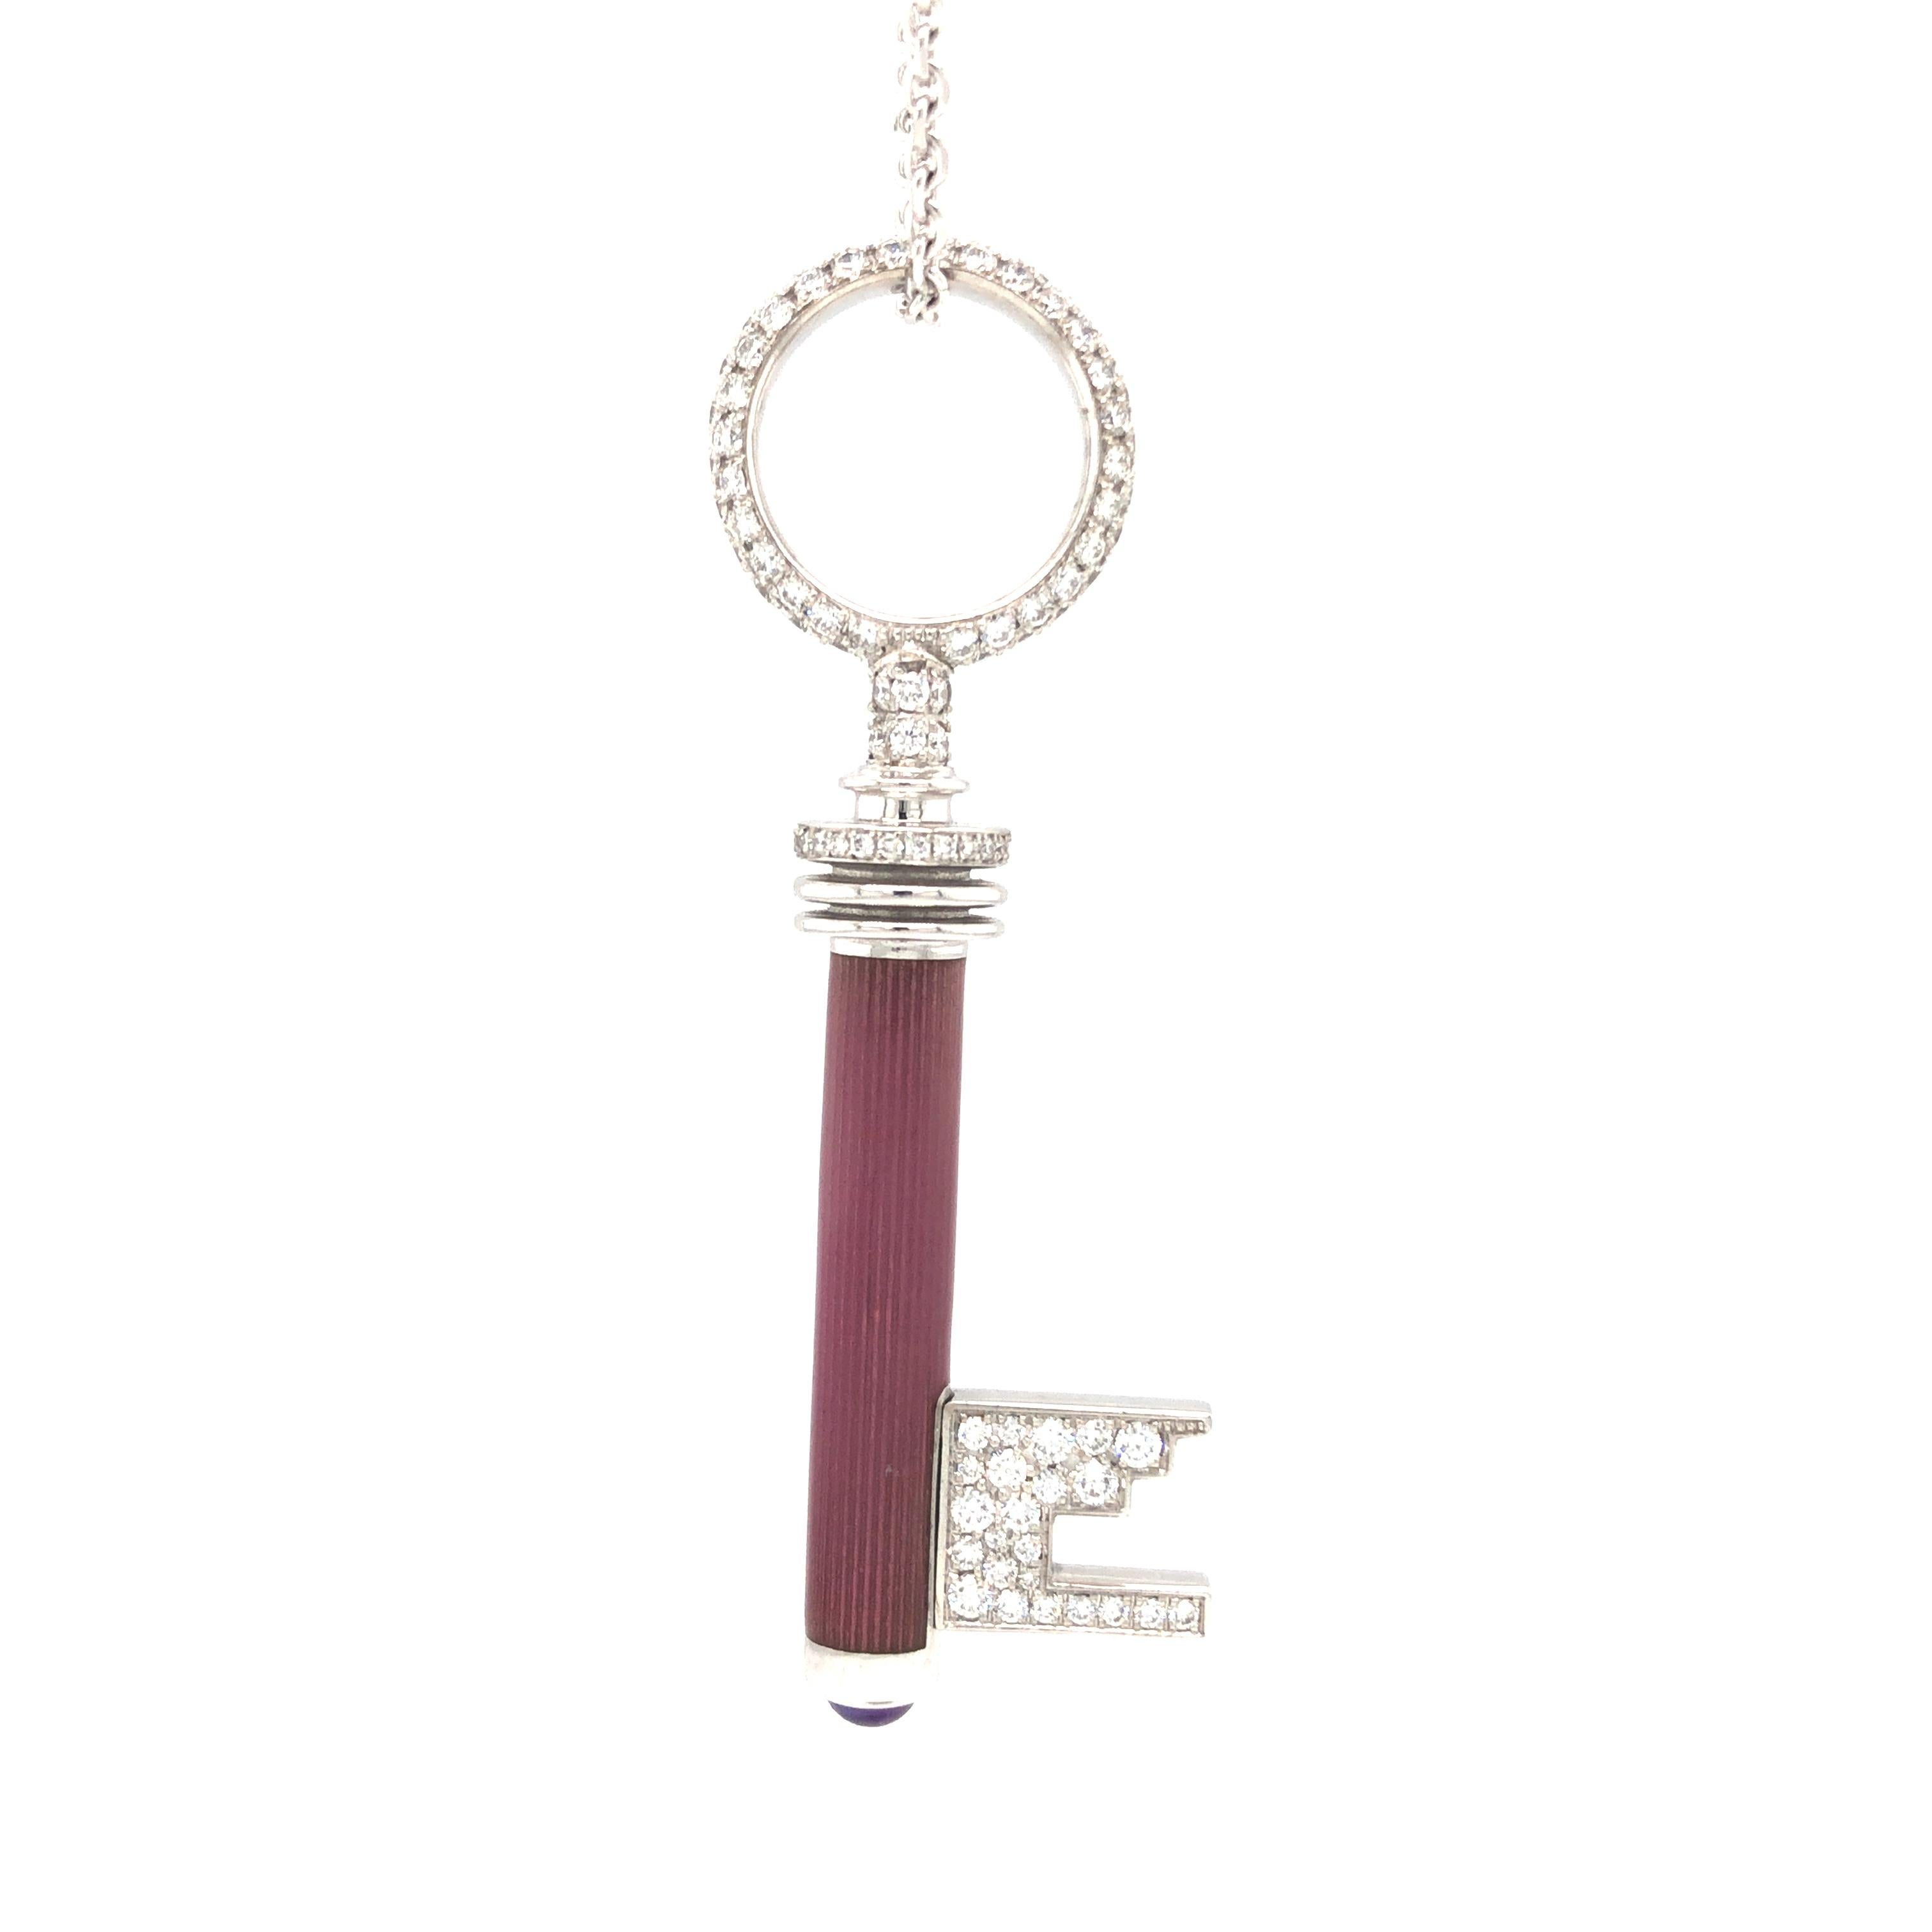 Victor Mayer key pendant 18k white gold, pink vitreous enamel, 162 diamonds, total 1.90 ct, G VS brilliant cut, amethyst cabochon - modelled after an original safe key from the 1920ies. 

About the creator Victor Mayer
Victor Mayer is